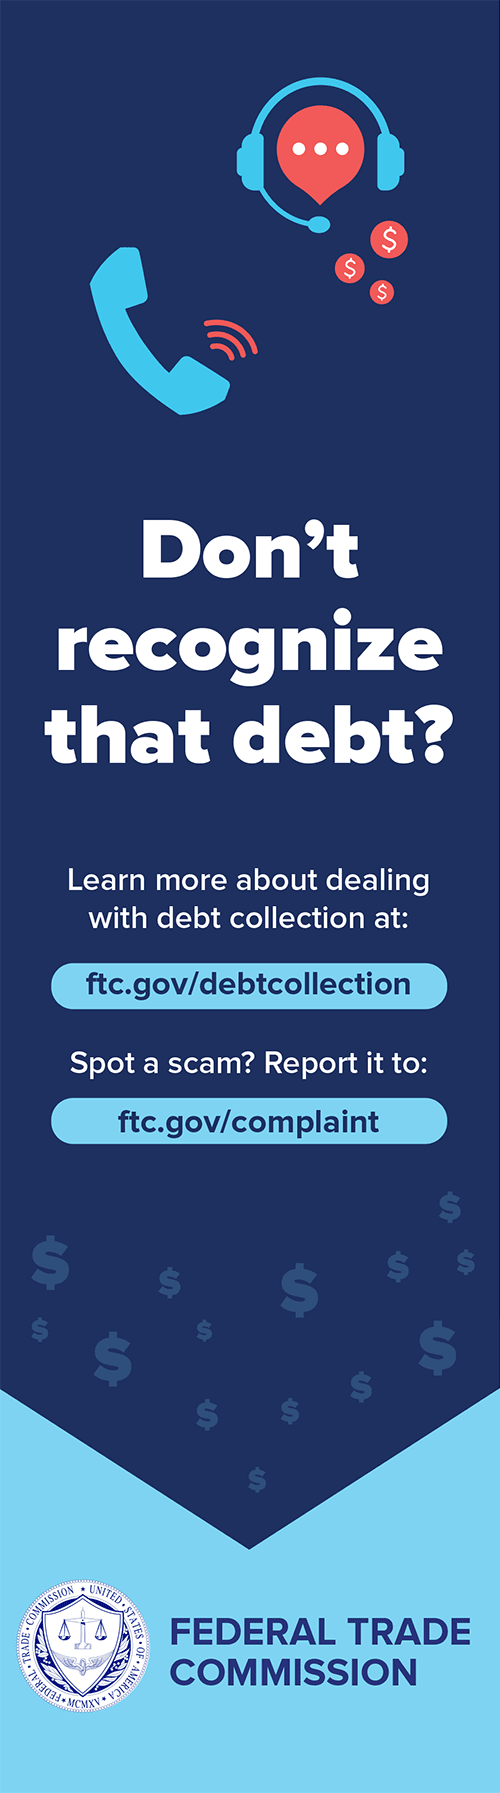 Don't Recognize That Debt infographic